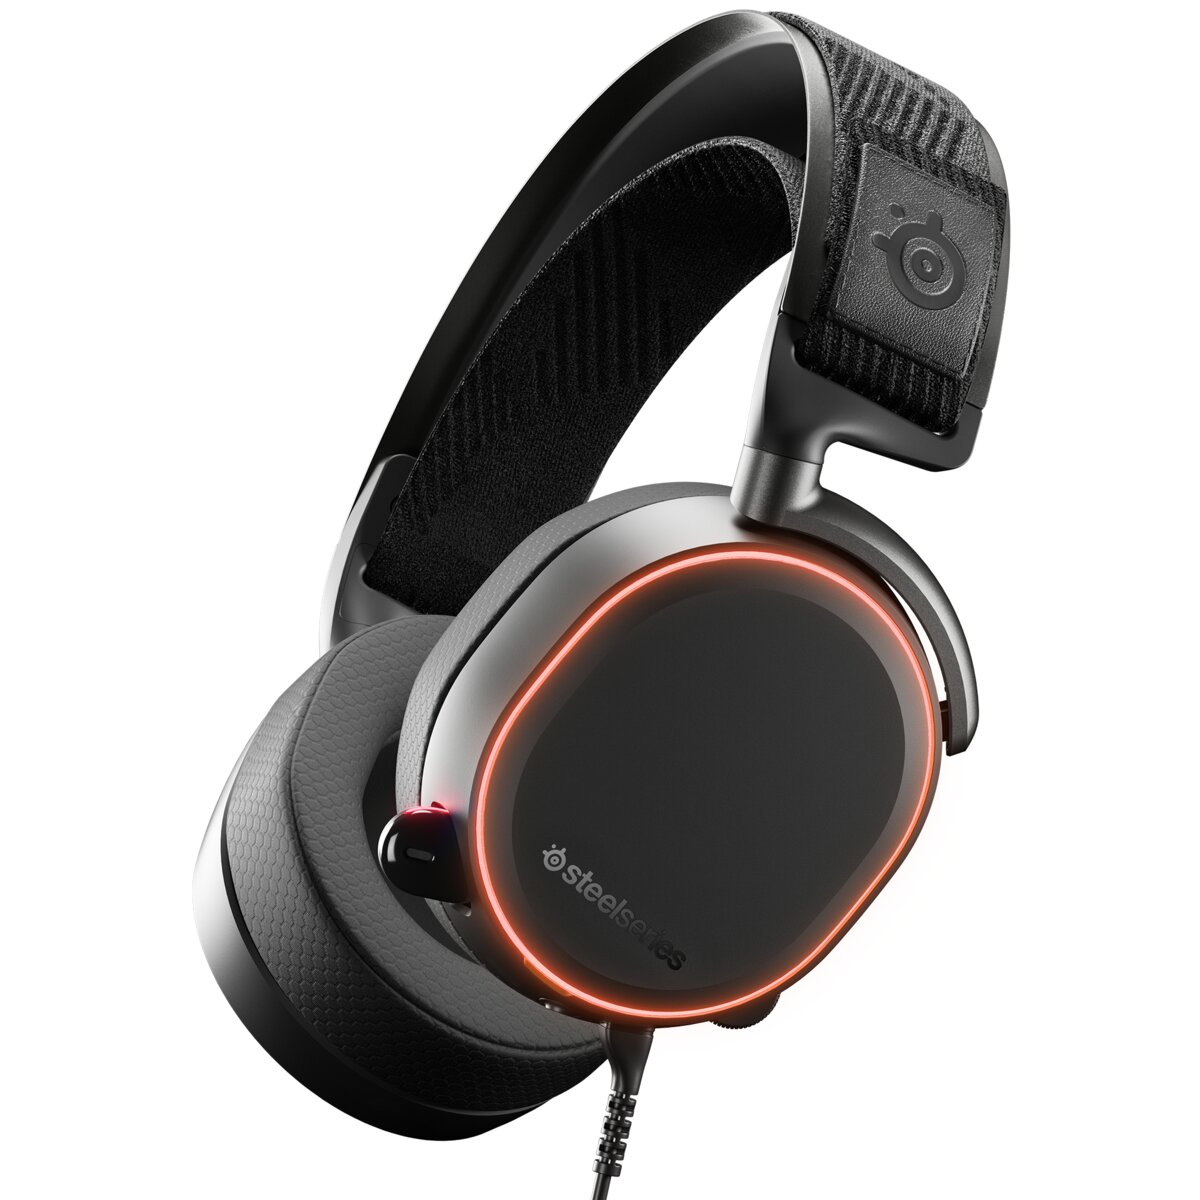 steelseries arctis 3 wired